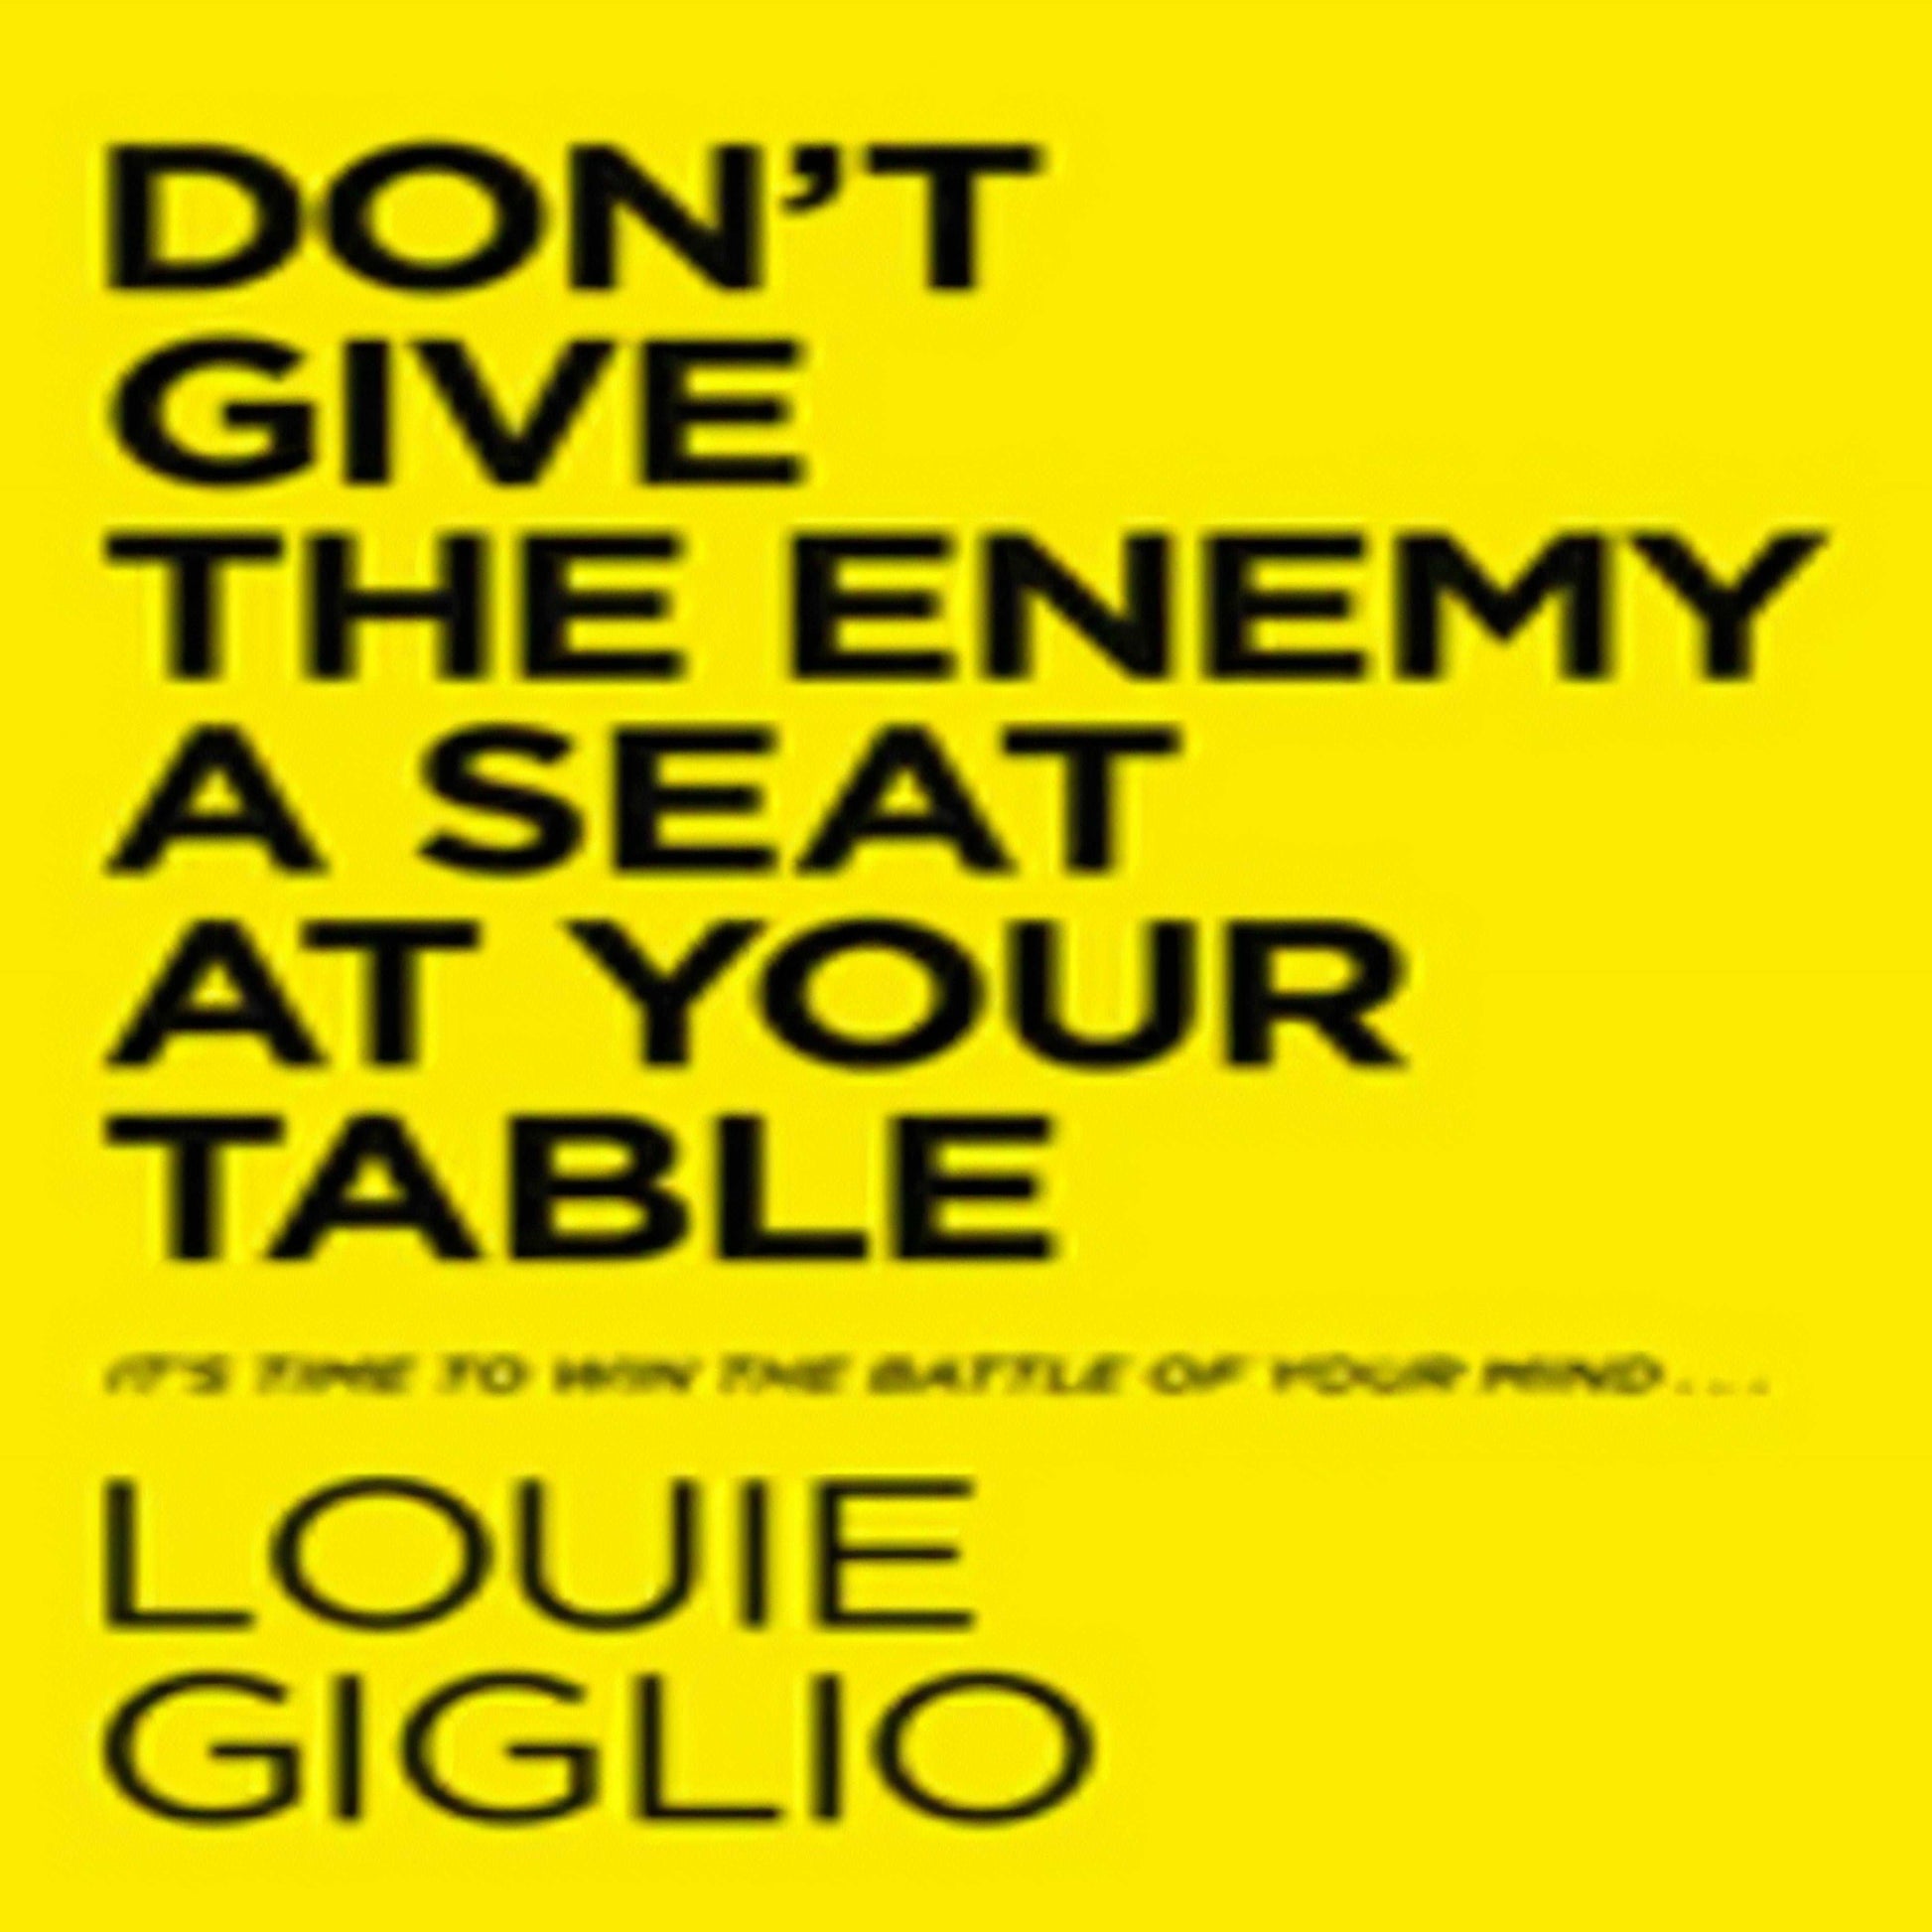 Don't Give the Enemy a Seat at Your Table: It's Time to Win the Battle of Your Mind...228-031523-078524722XDPGBOOKSTORE.COM. Today's Bestsellers.